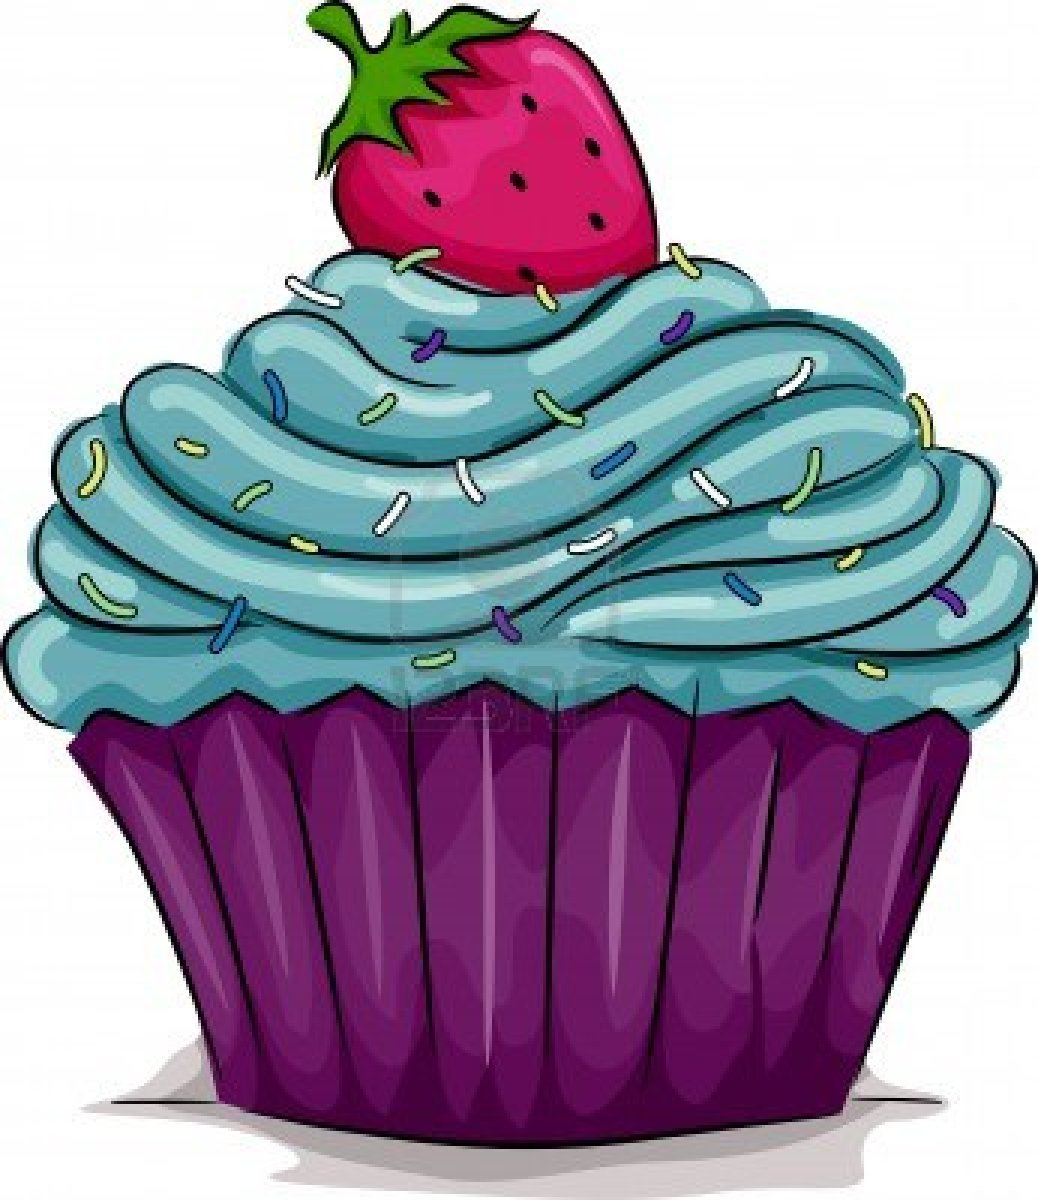 Free Image Of A Cupcake Download Free Clip Art Free Clip Art On 